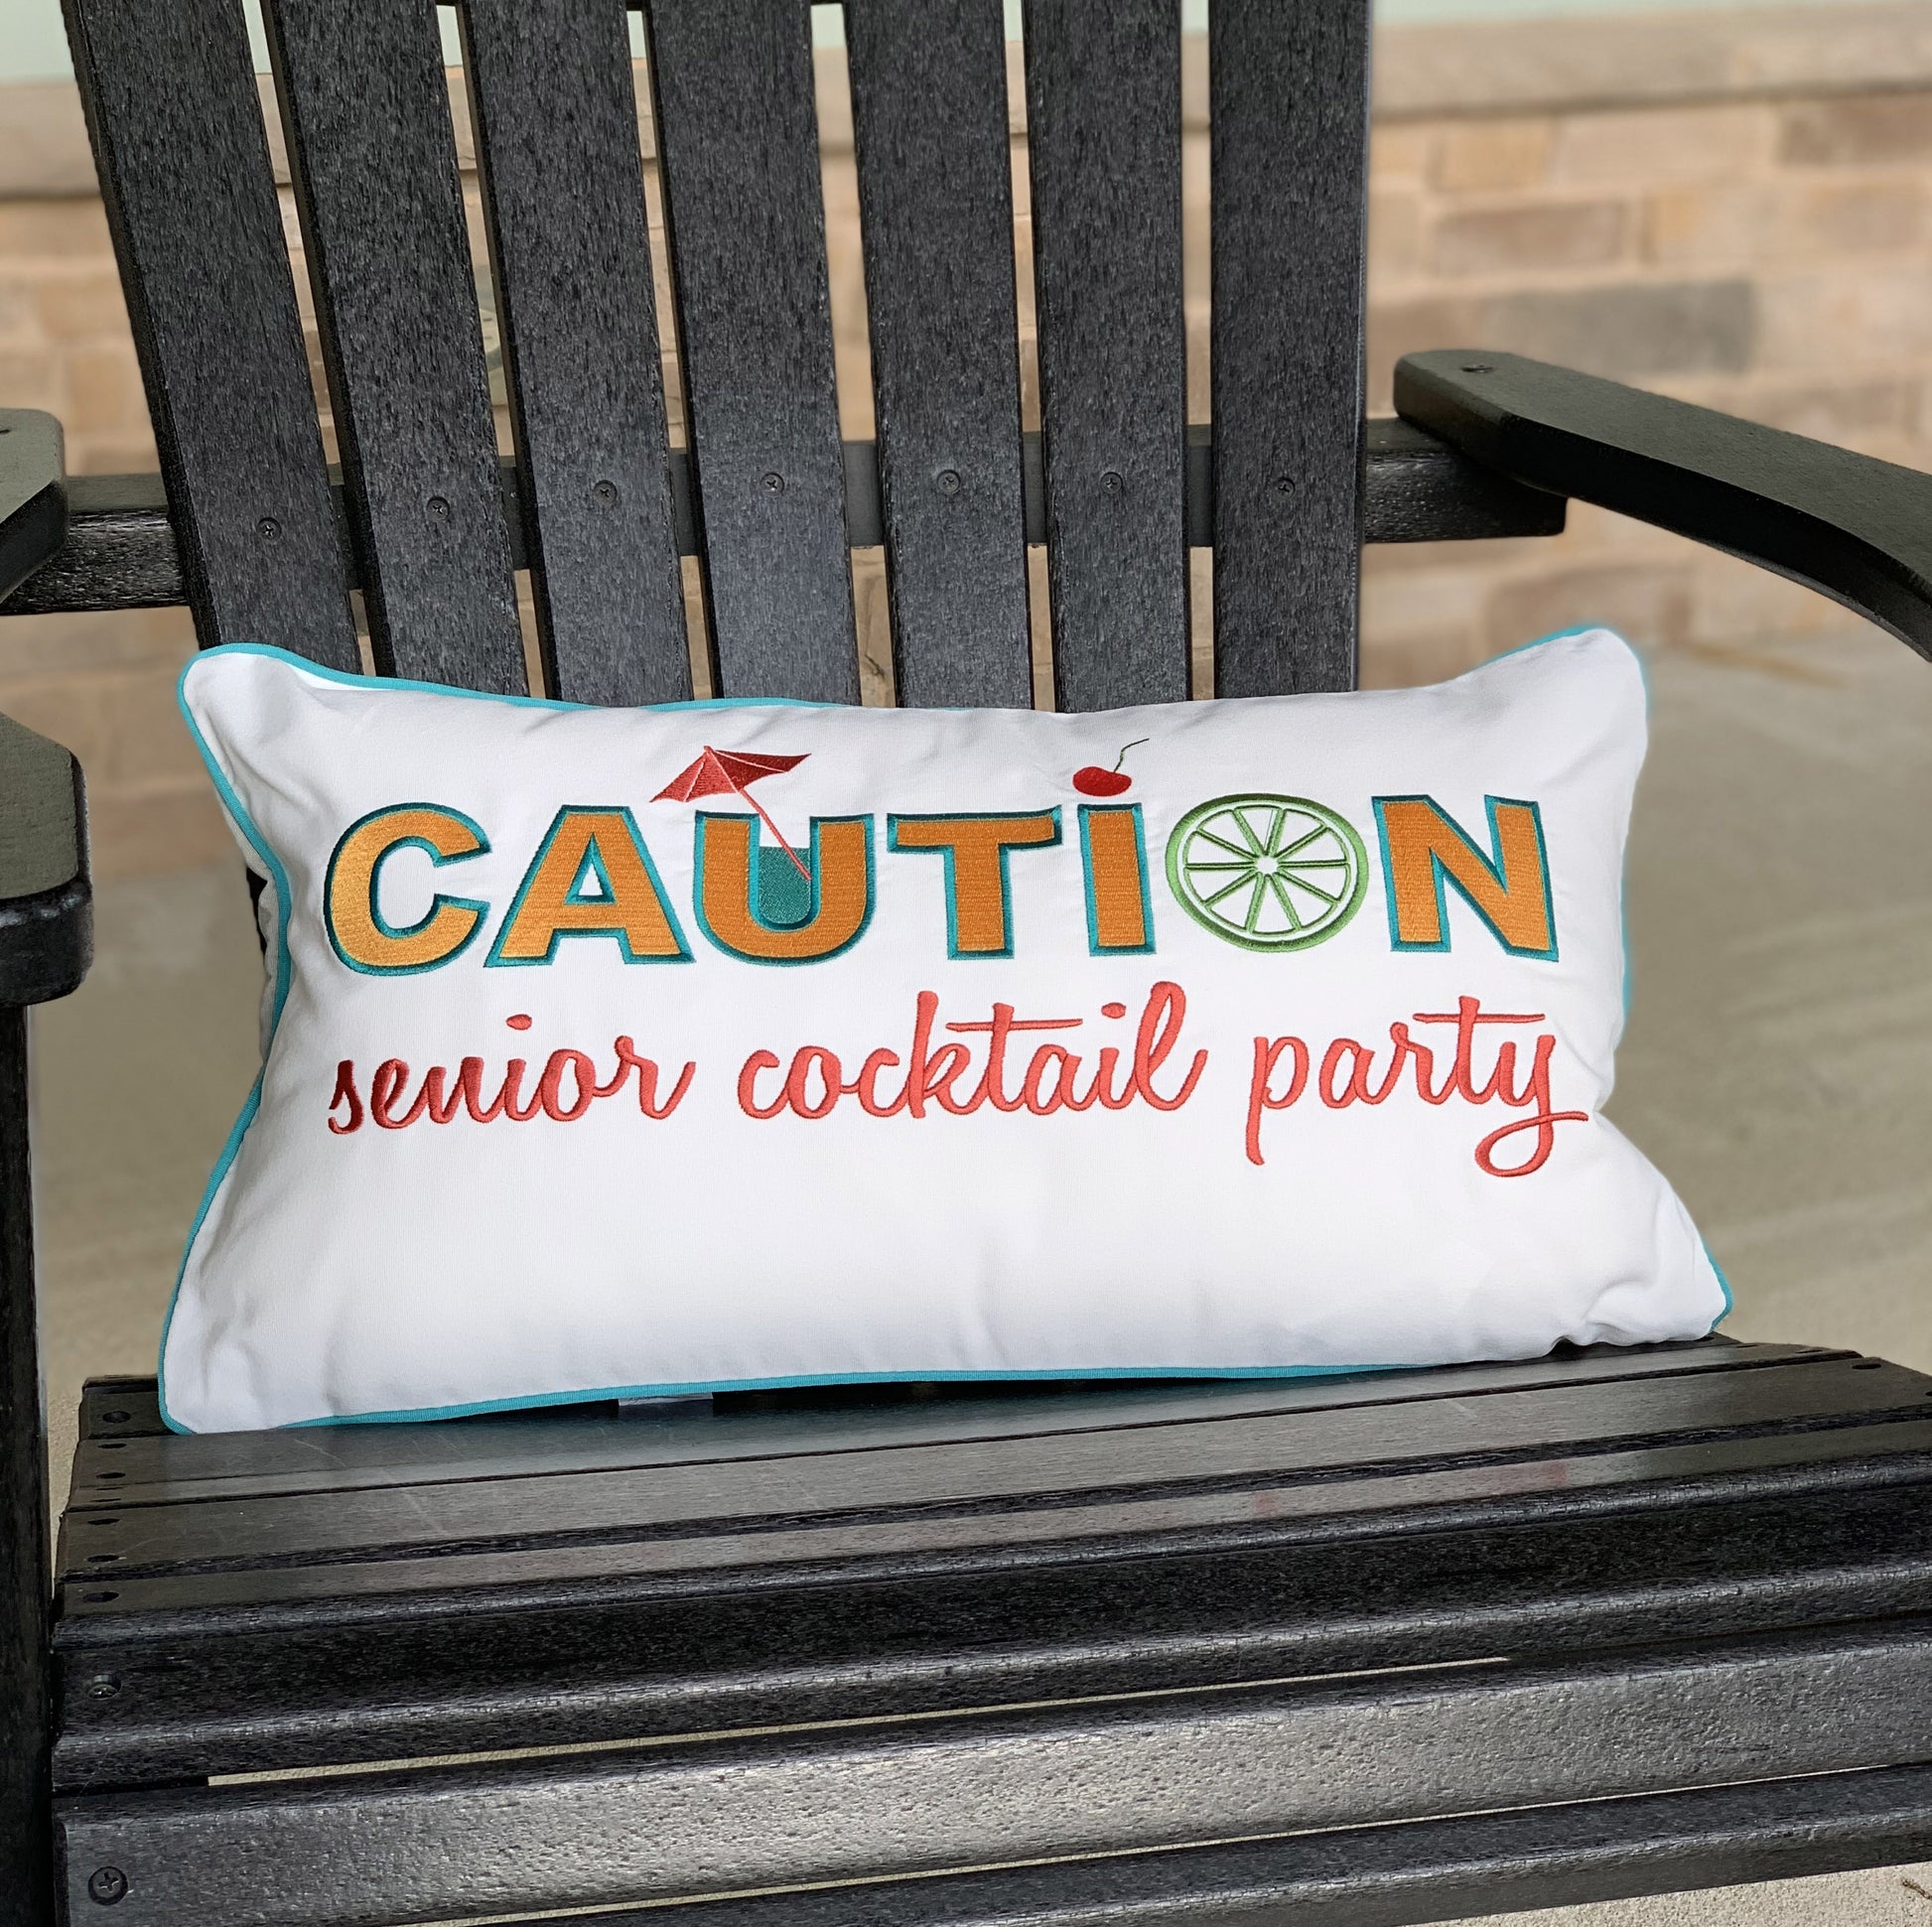 Caution Senior Cocktail Party pillow styled on an Adirondack chair.